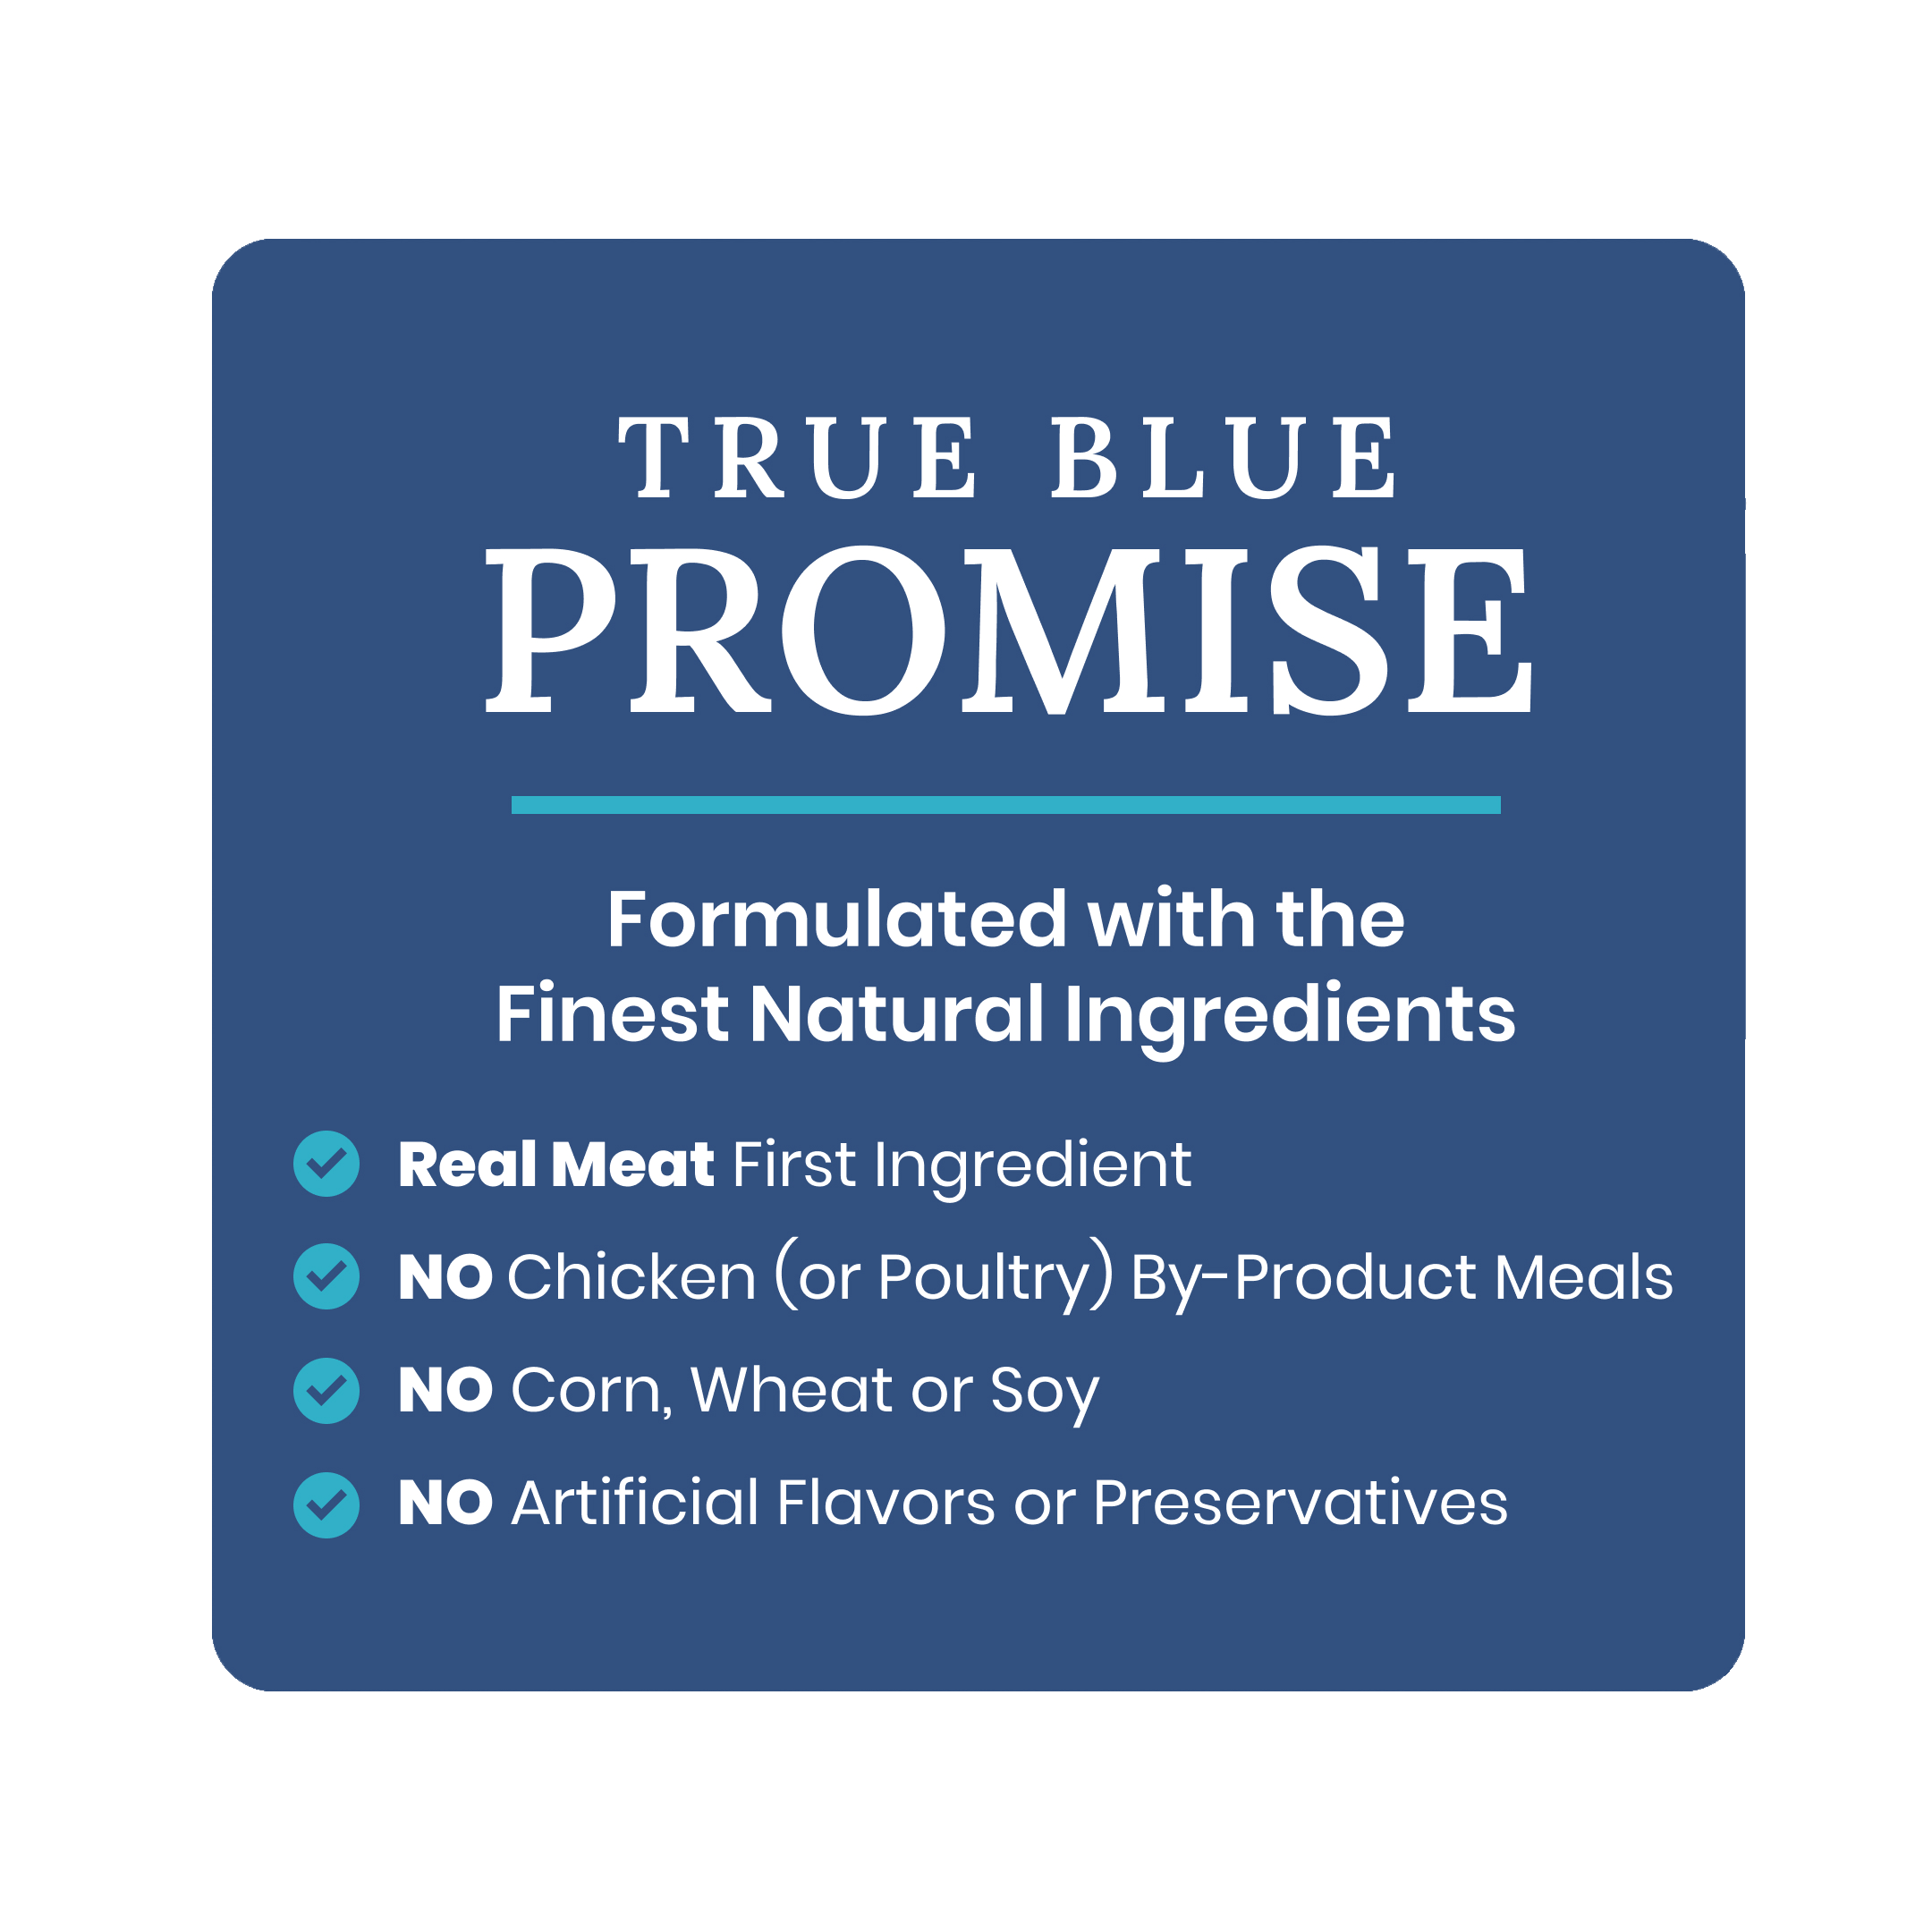 True Blue Promise; formulated with the finest natural ingredients